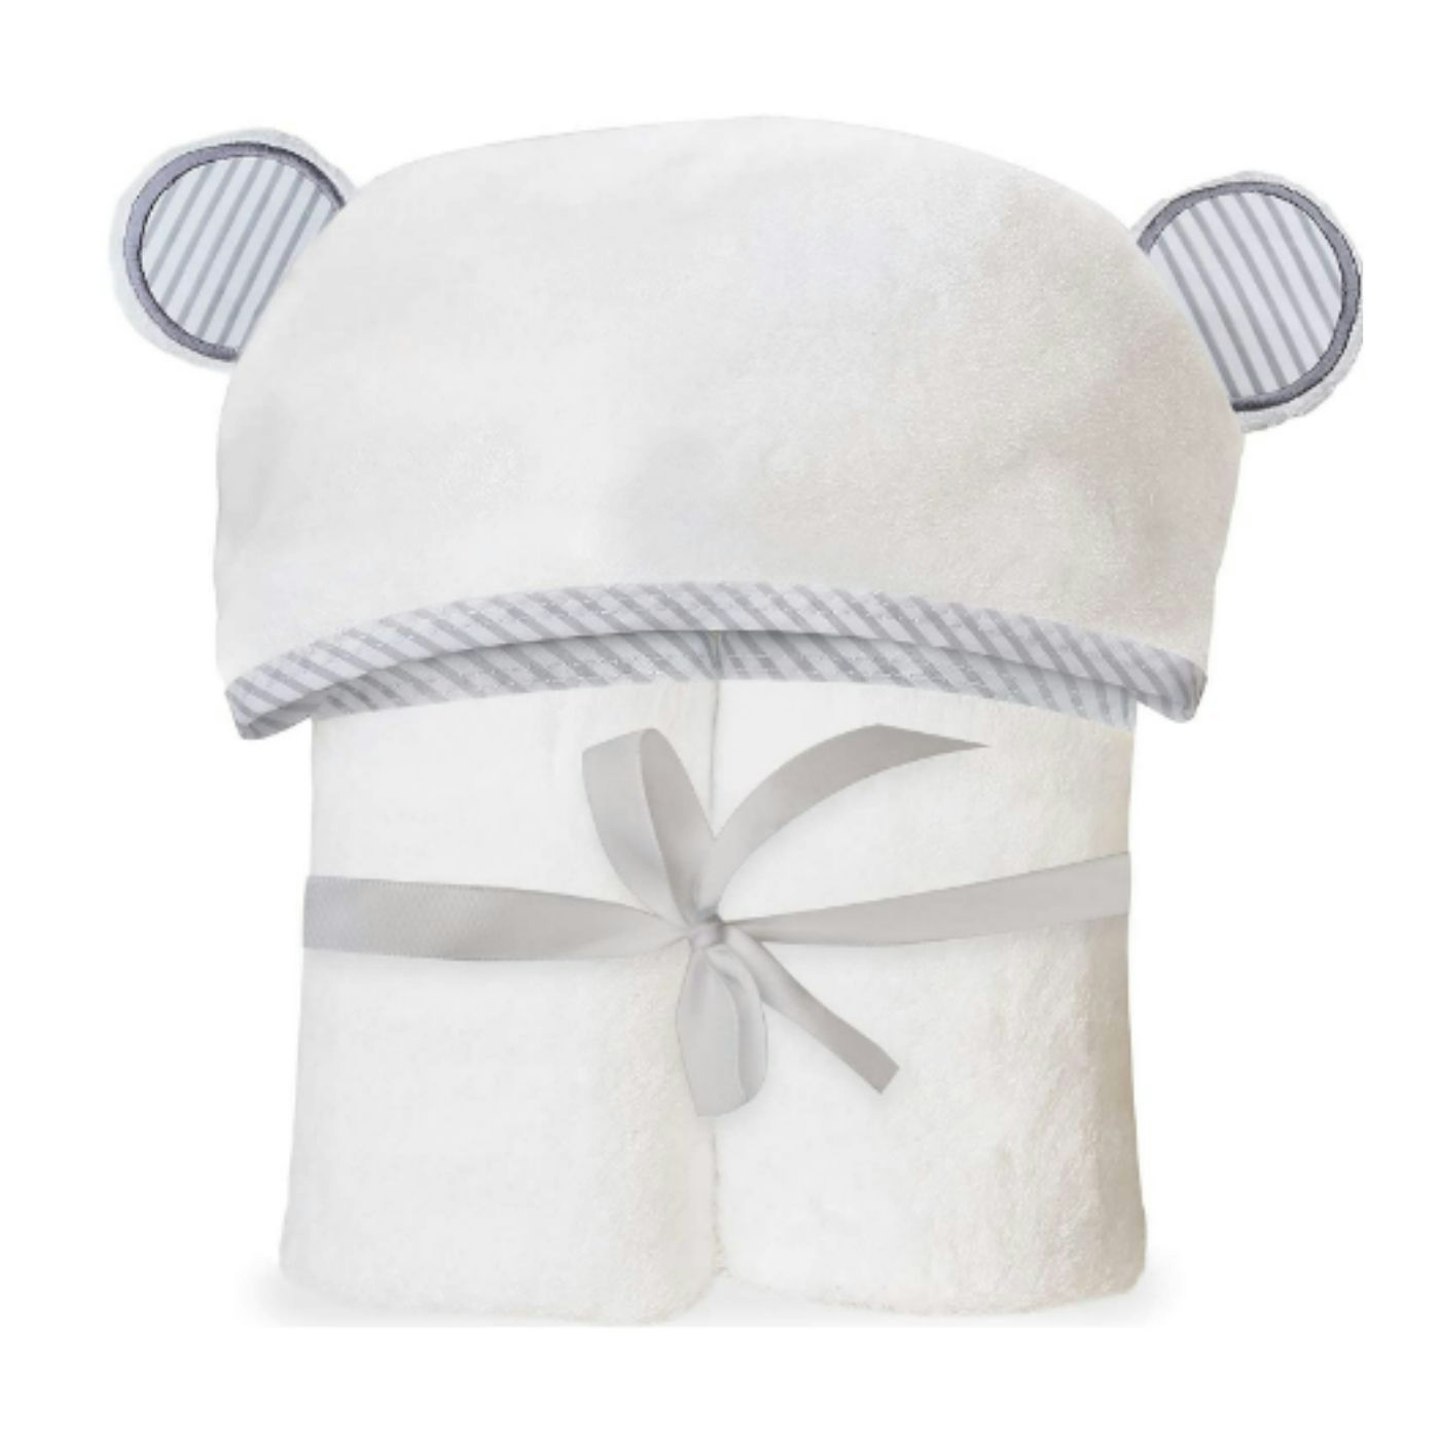 Hooded Towel for Kids and Babies